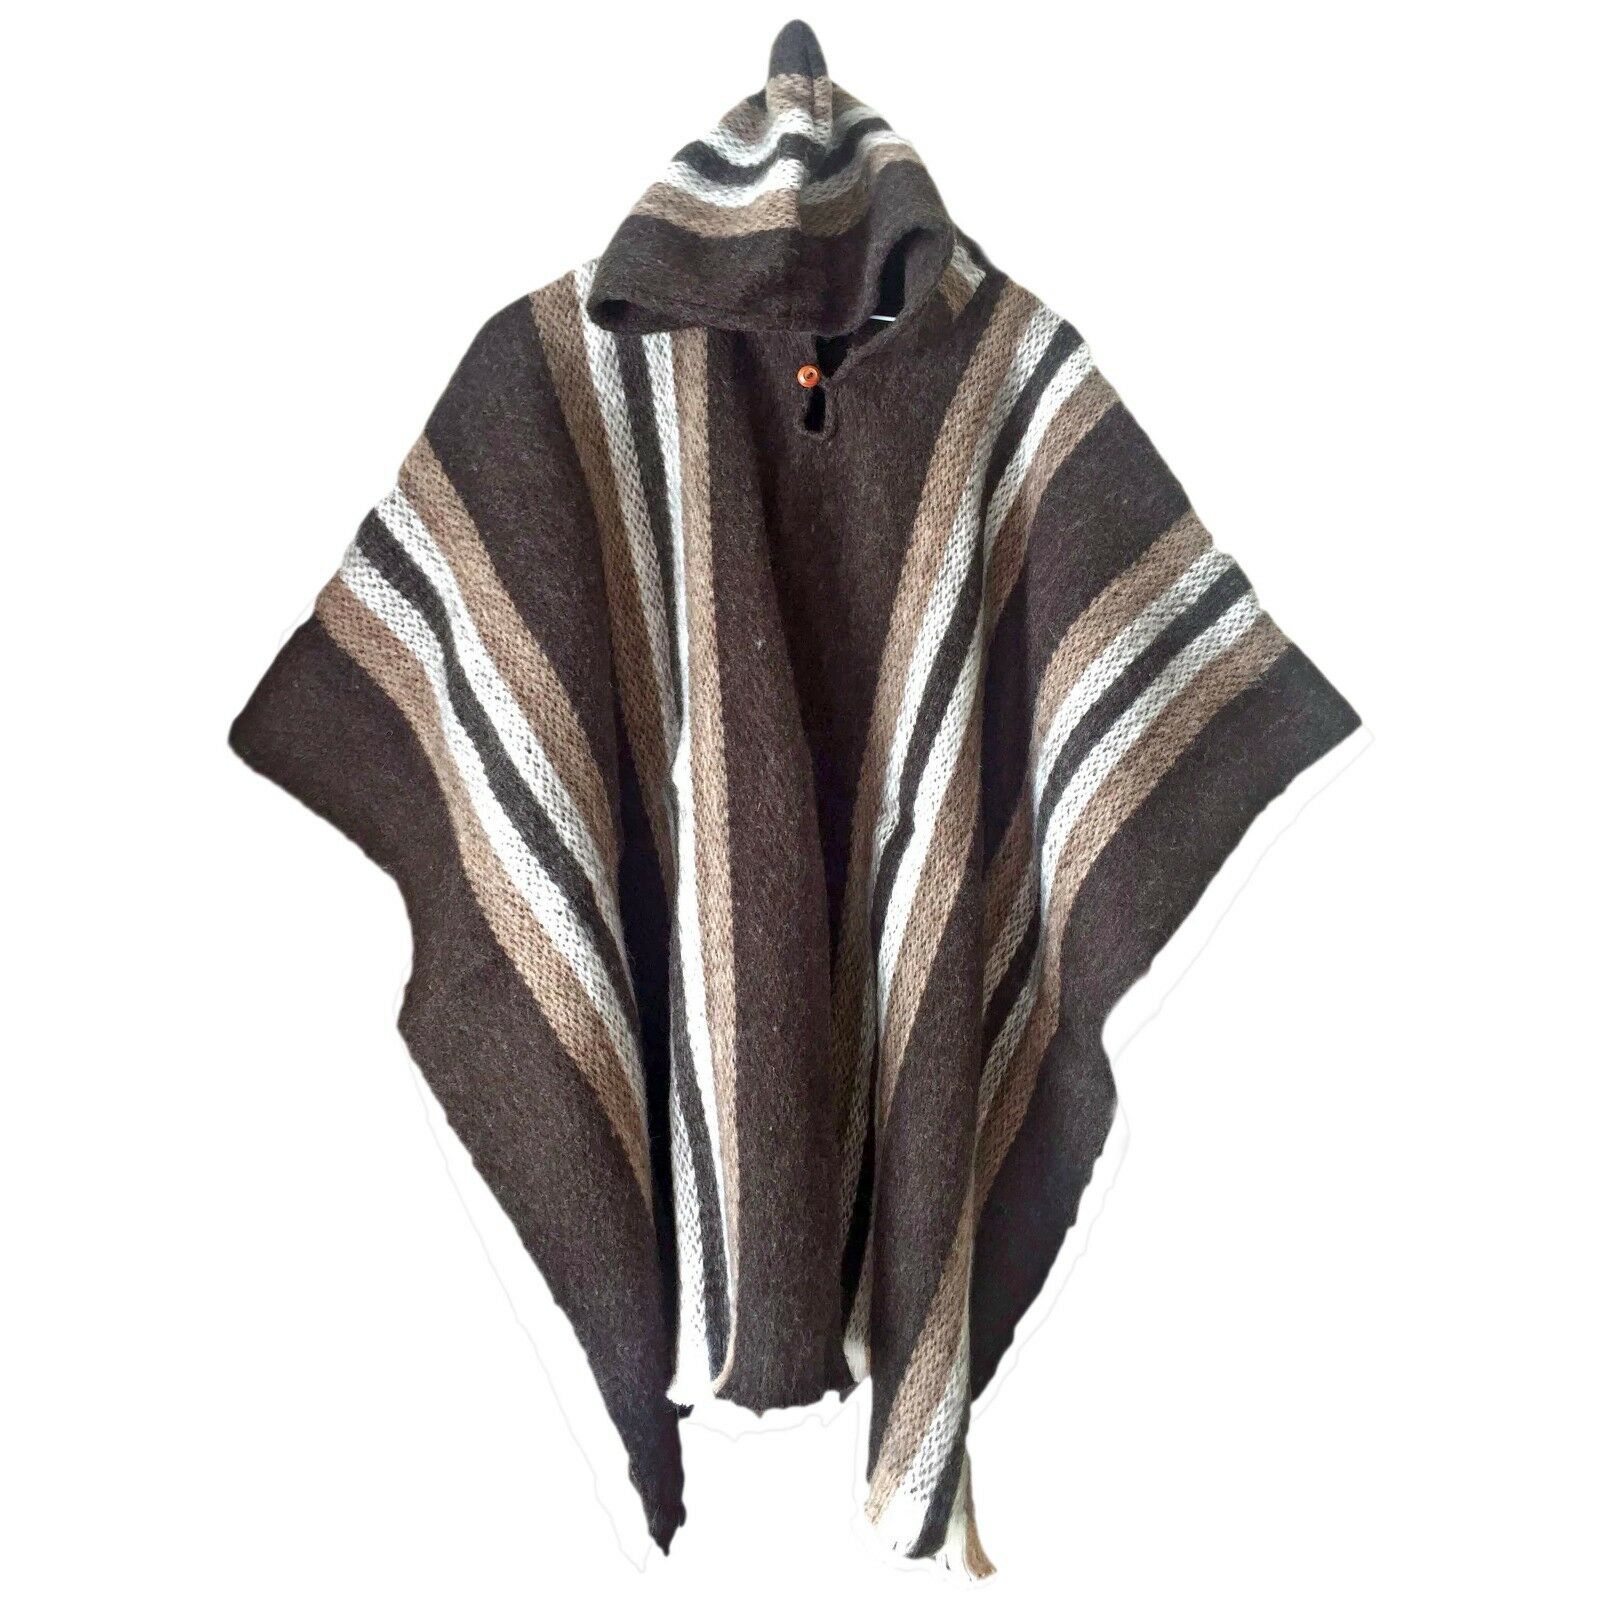 Wholesale Lot Of 10 Llama Wool Unisex South American Hooded Ponchos Pullovers - Brown